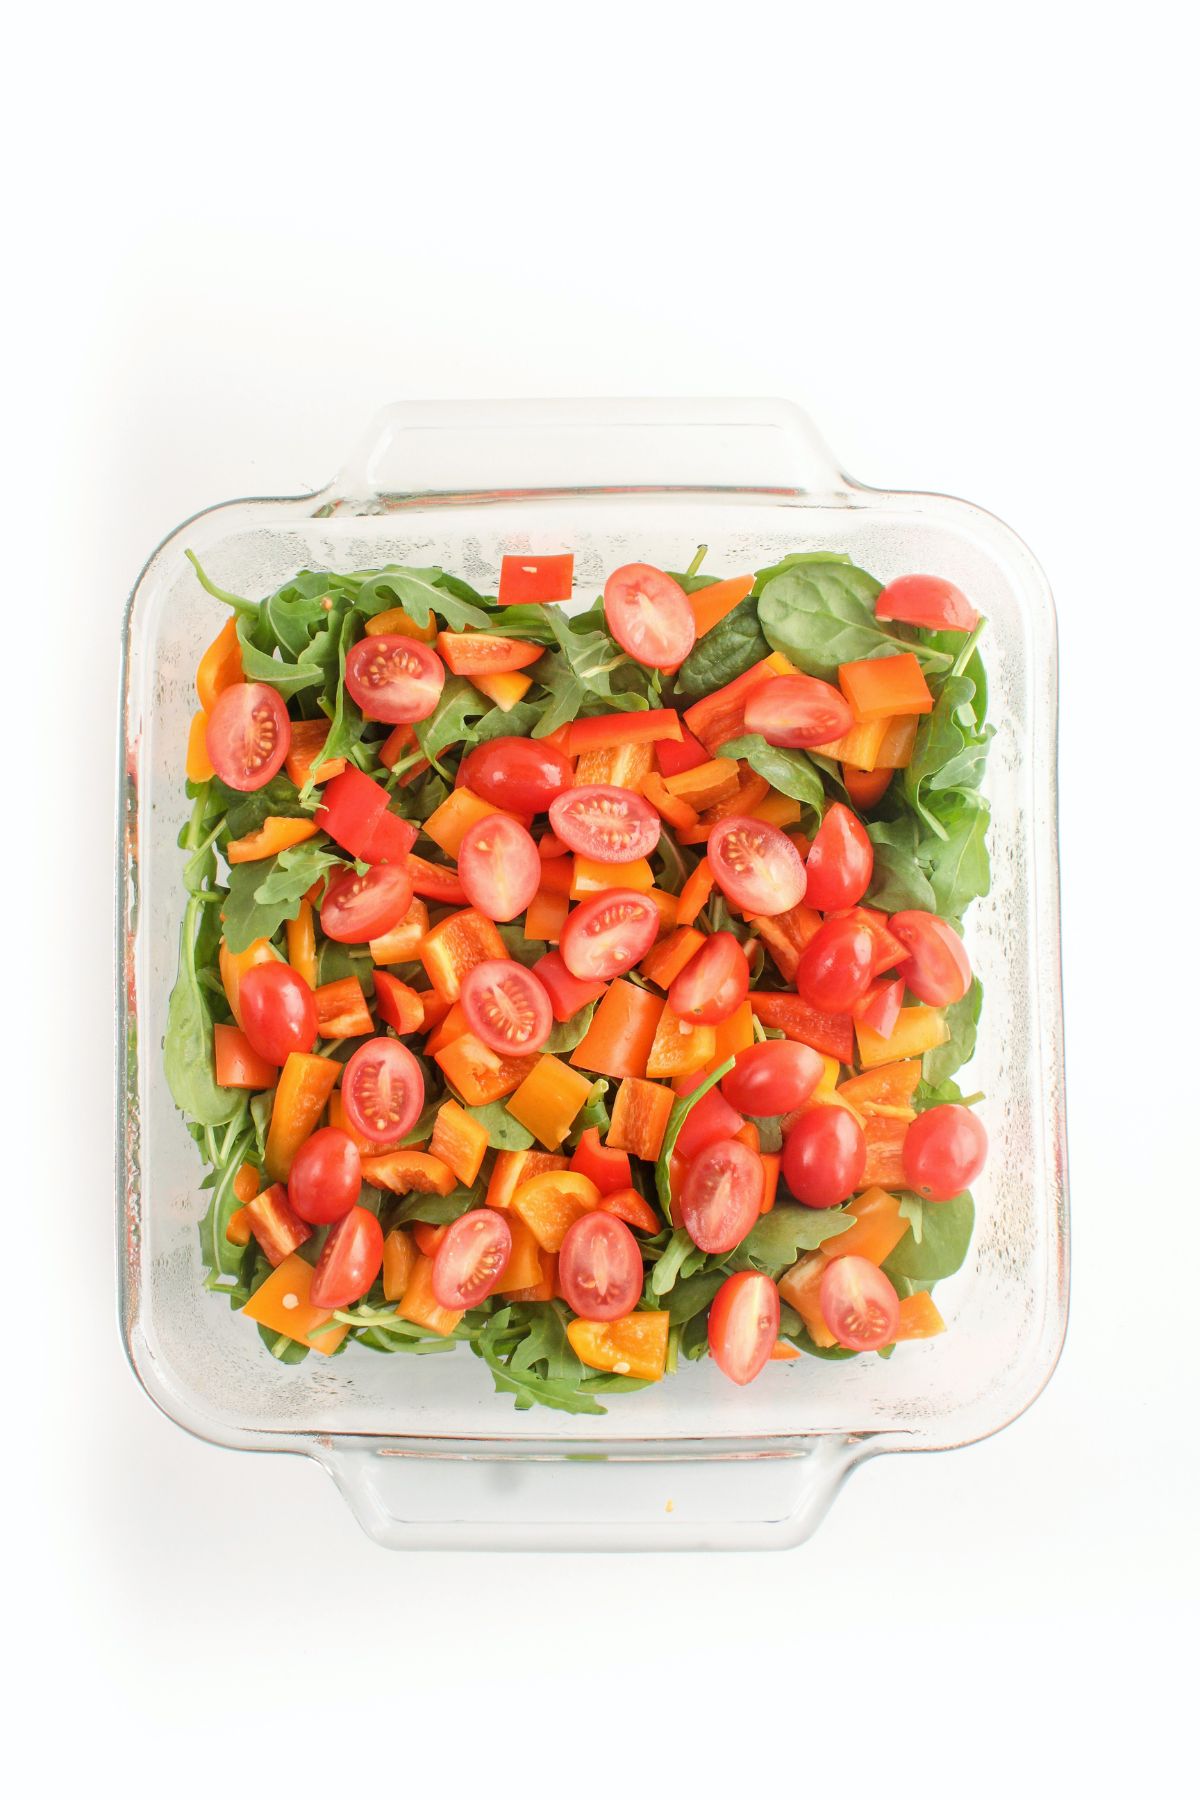 square glass baking dish filled with cherry tomatoes, spinach, and orange bell peppers